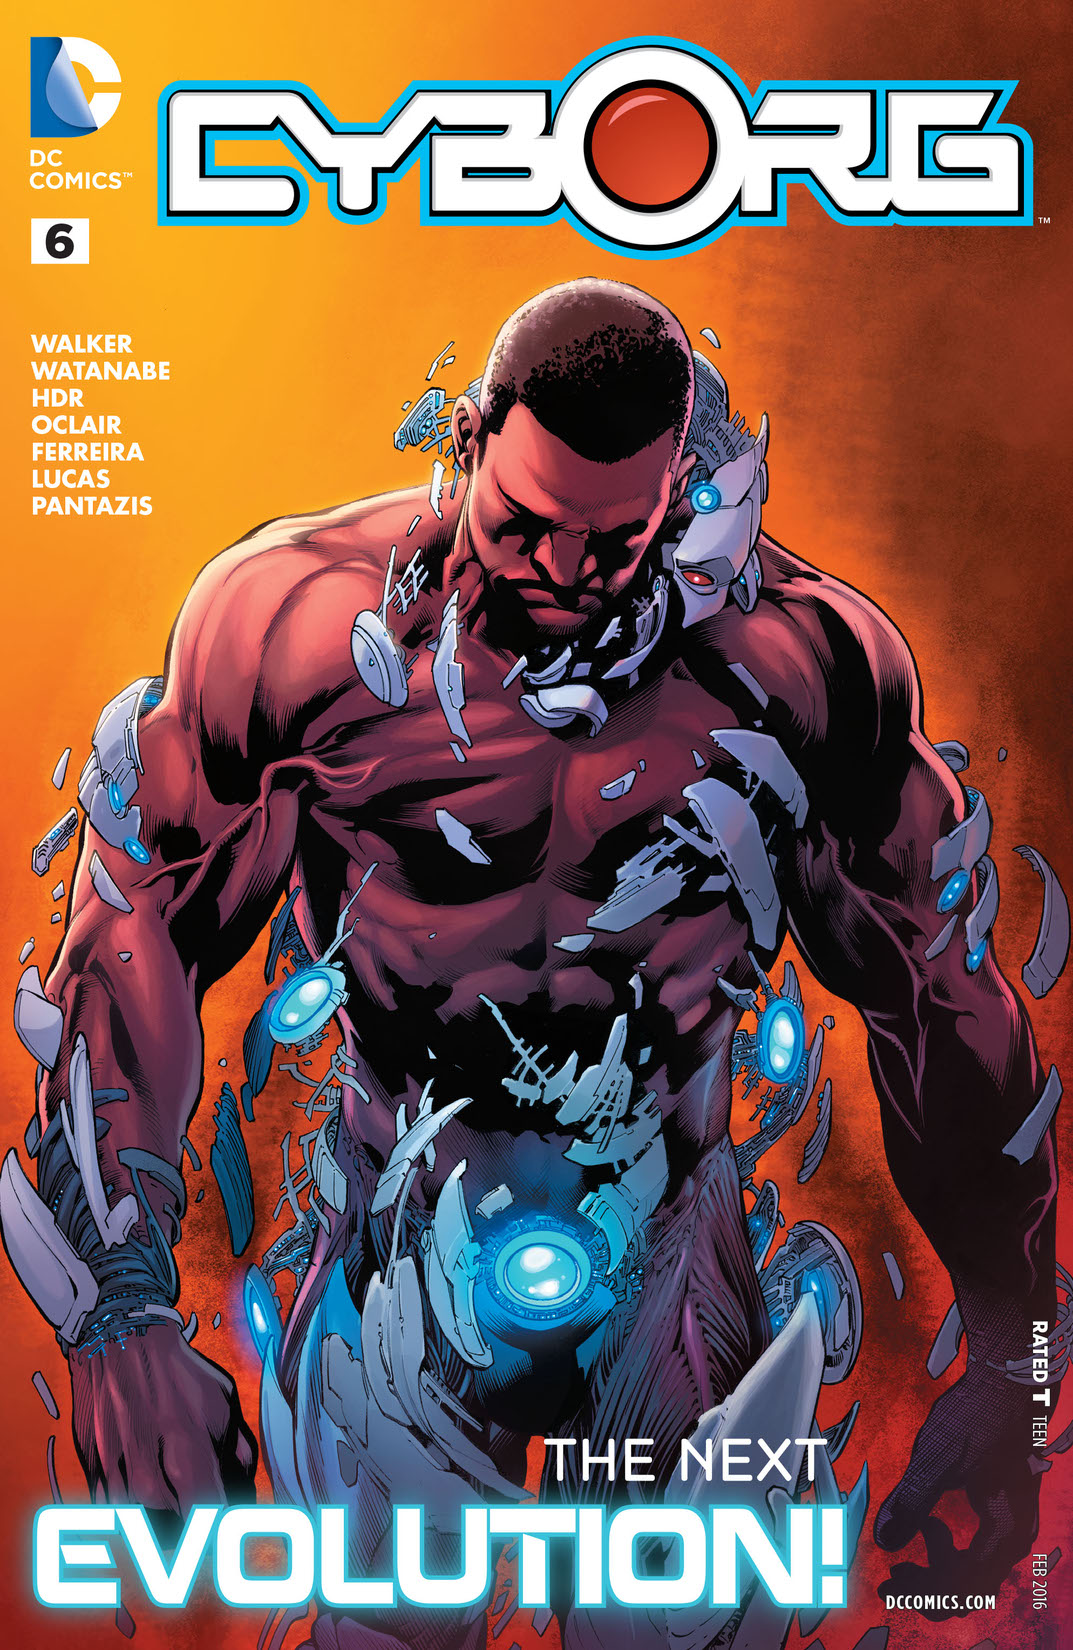 Cyborg (2015-) #6 preview images